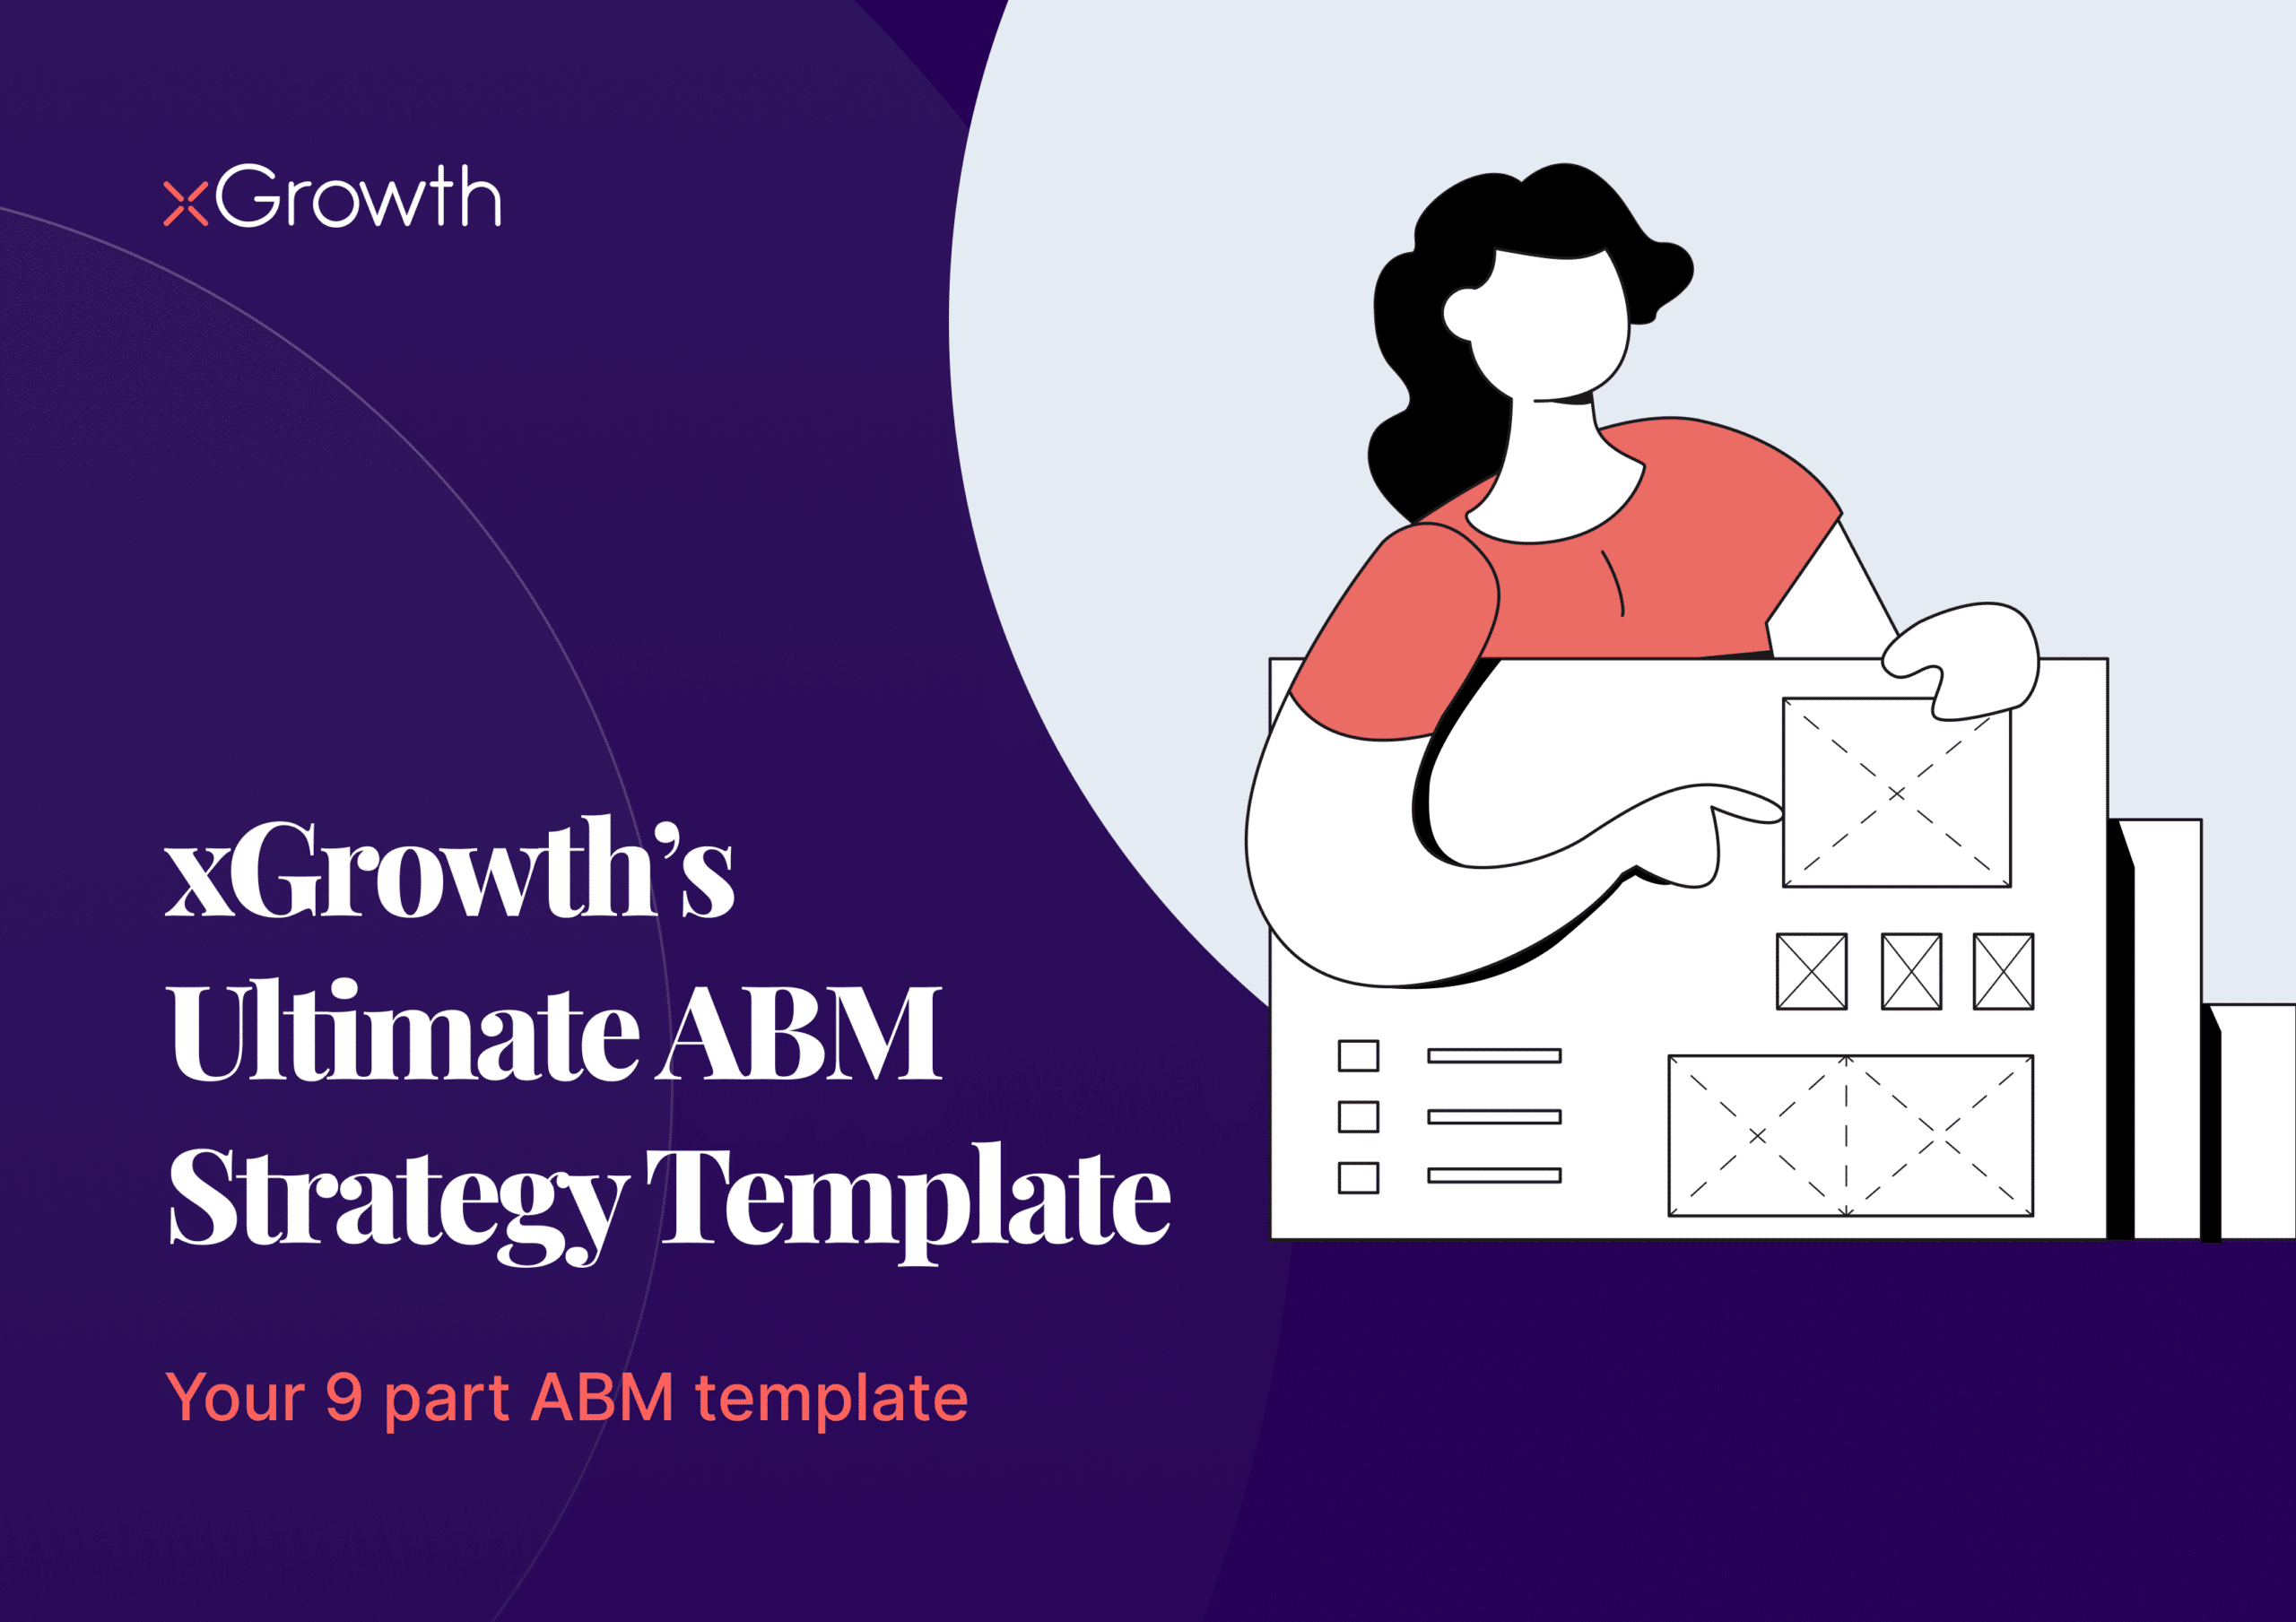 account-based-marketing-abm-strategy-template-xgrowth